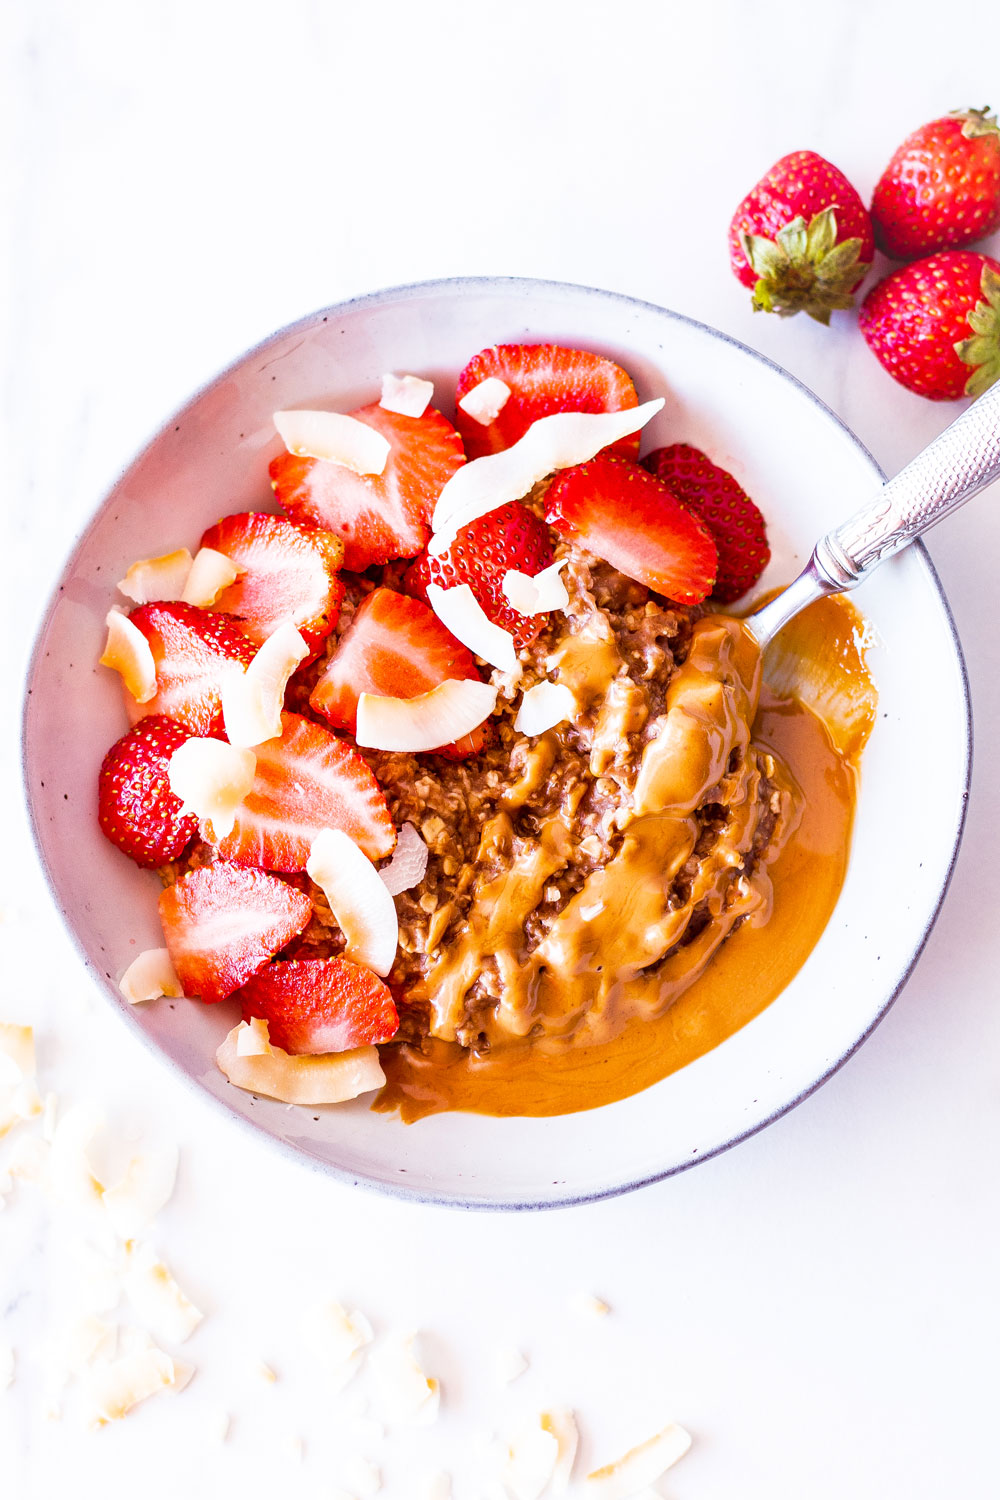 The ultimate 5-minute yummy breakfast recipe, this Chocolate, Peanut Butter & Strawberries Oatmeal Bowl is creamy, decadent, and will keep you full and cravings-free all morning long! https://www.spotebi.com/recipes/peanut-butter-strawberries-oatmeal-bowl/